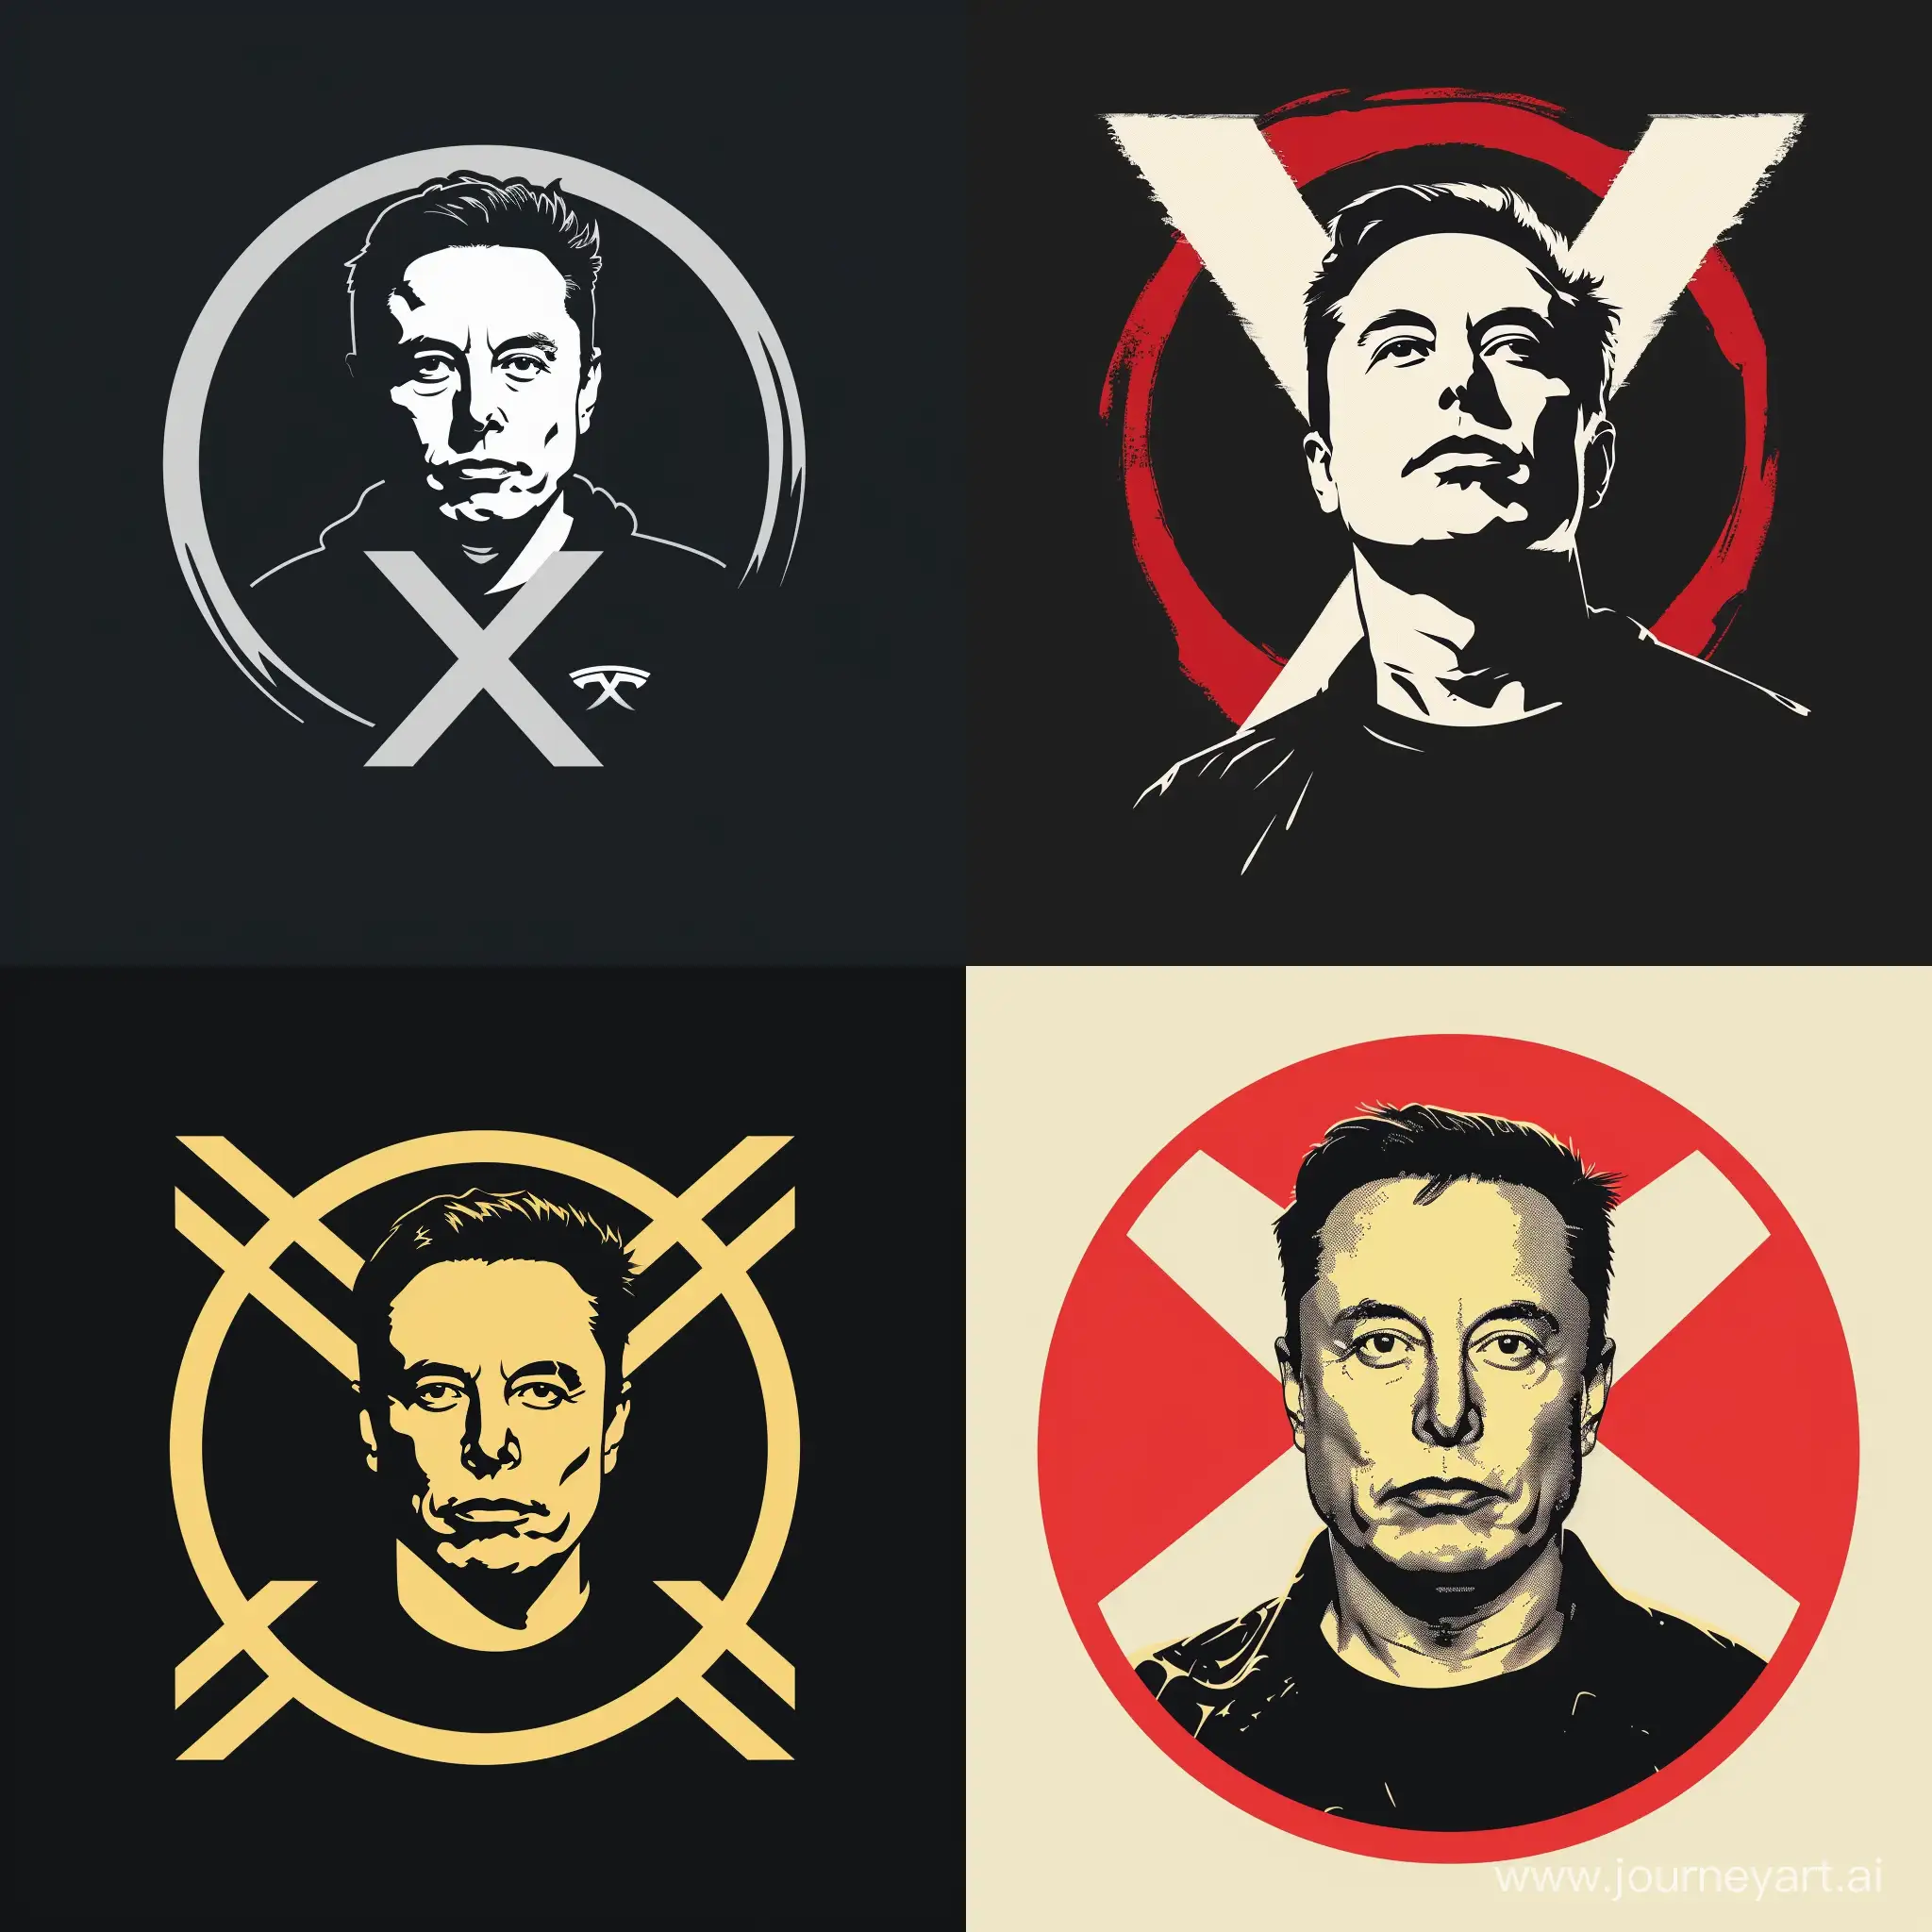 The face of Elon Must on the company logo of X.